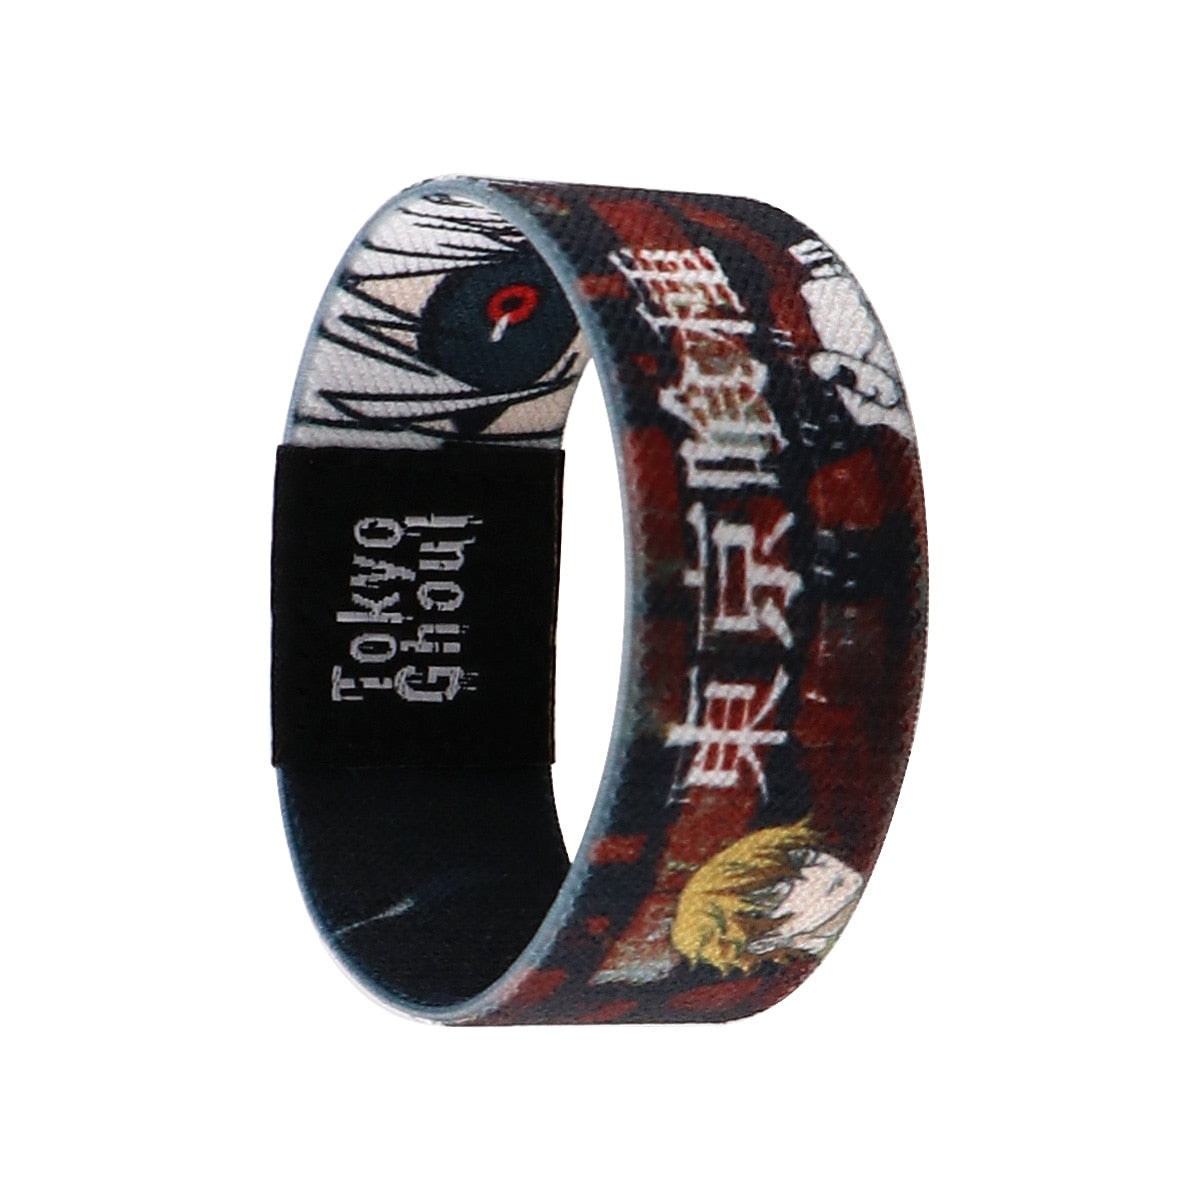 Tokyo Ghoul Sports Wristbands